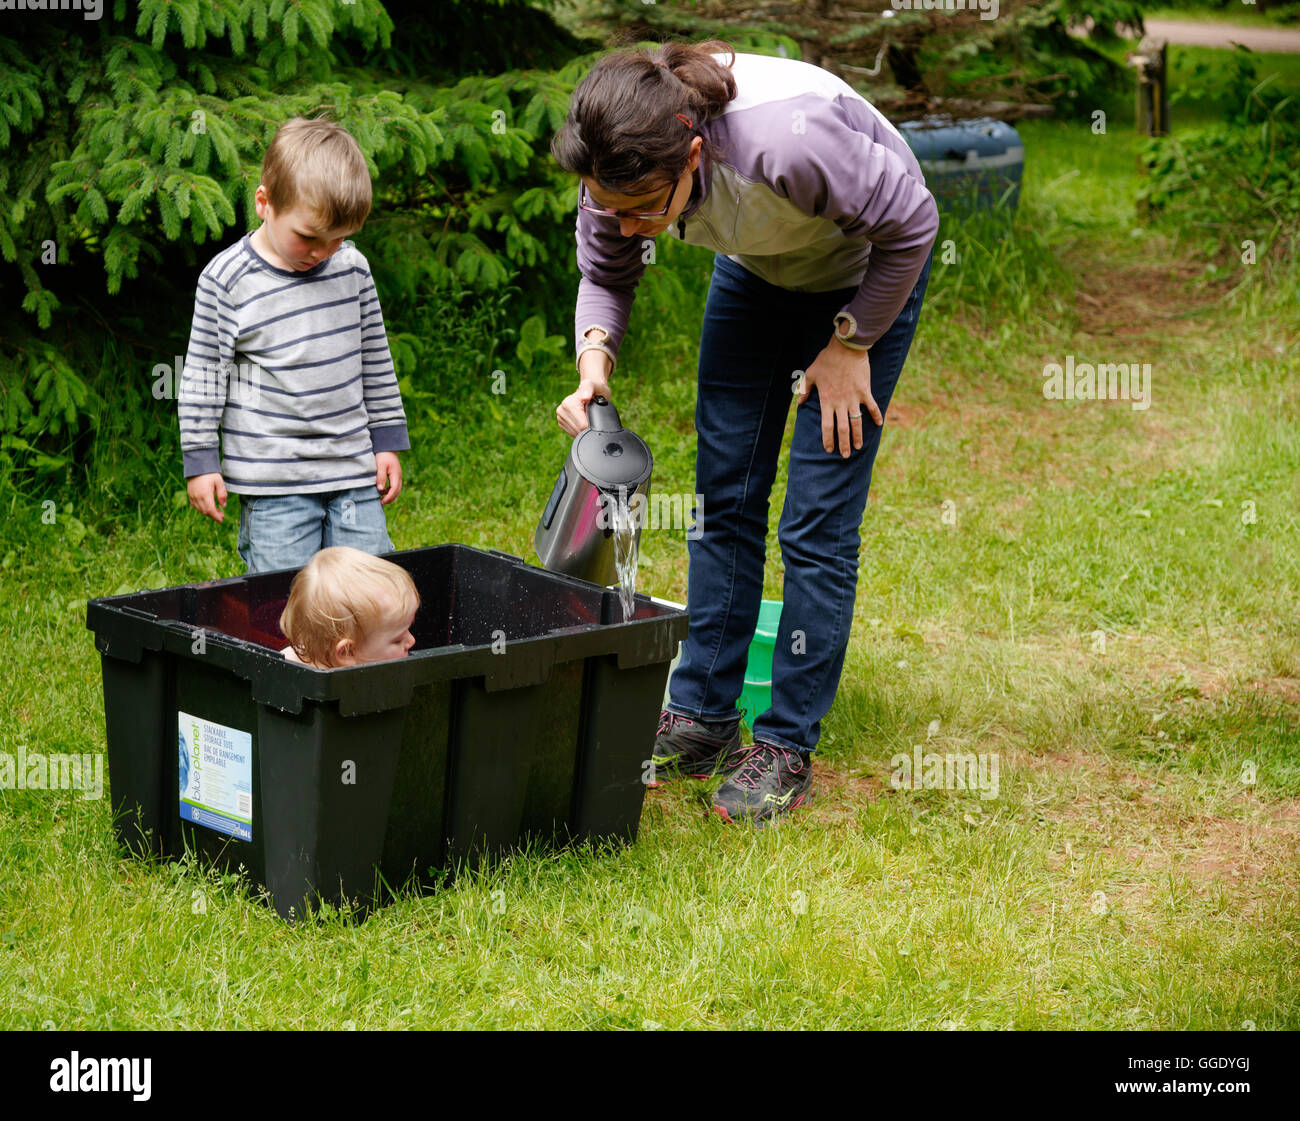 A little girl (2 years old) being bathed in a plastic box while camping Mum adds warm water from a kettle and brother watches Stock Photo